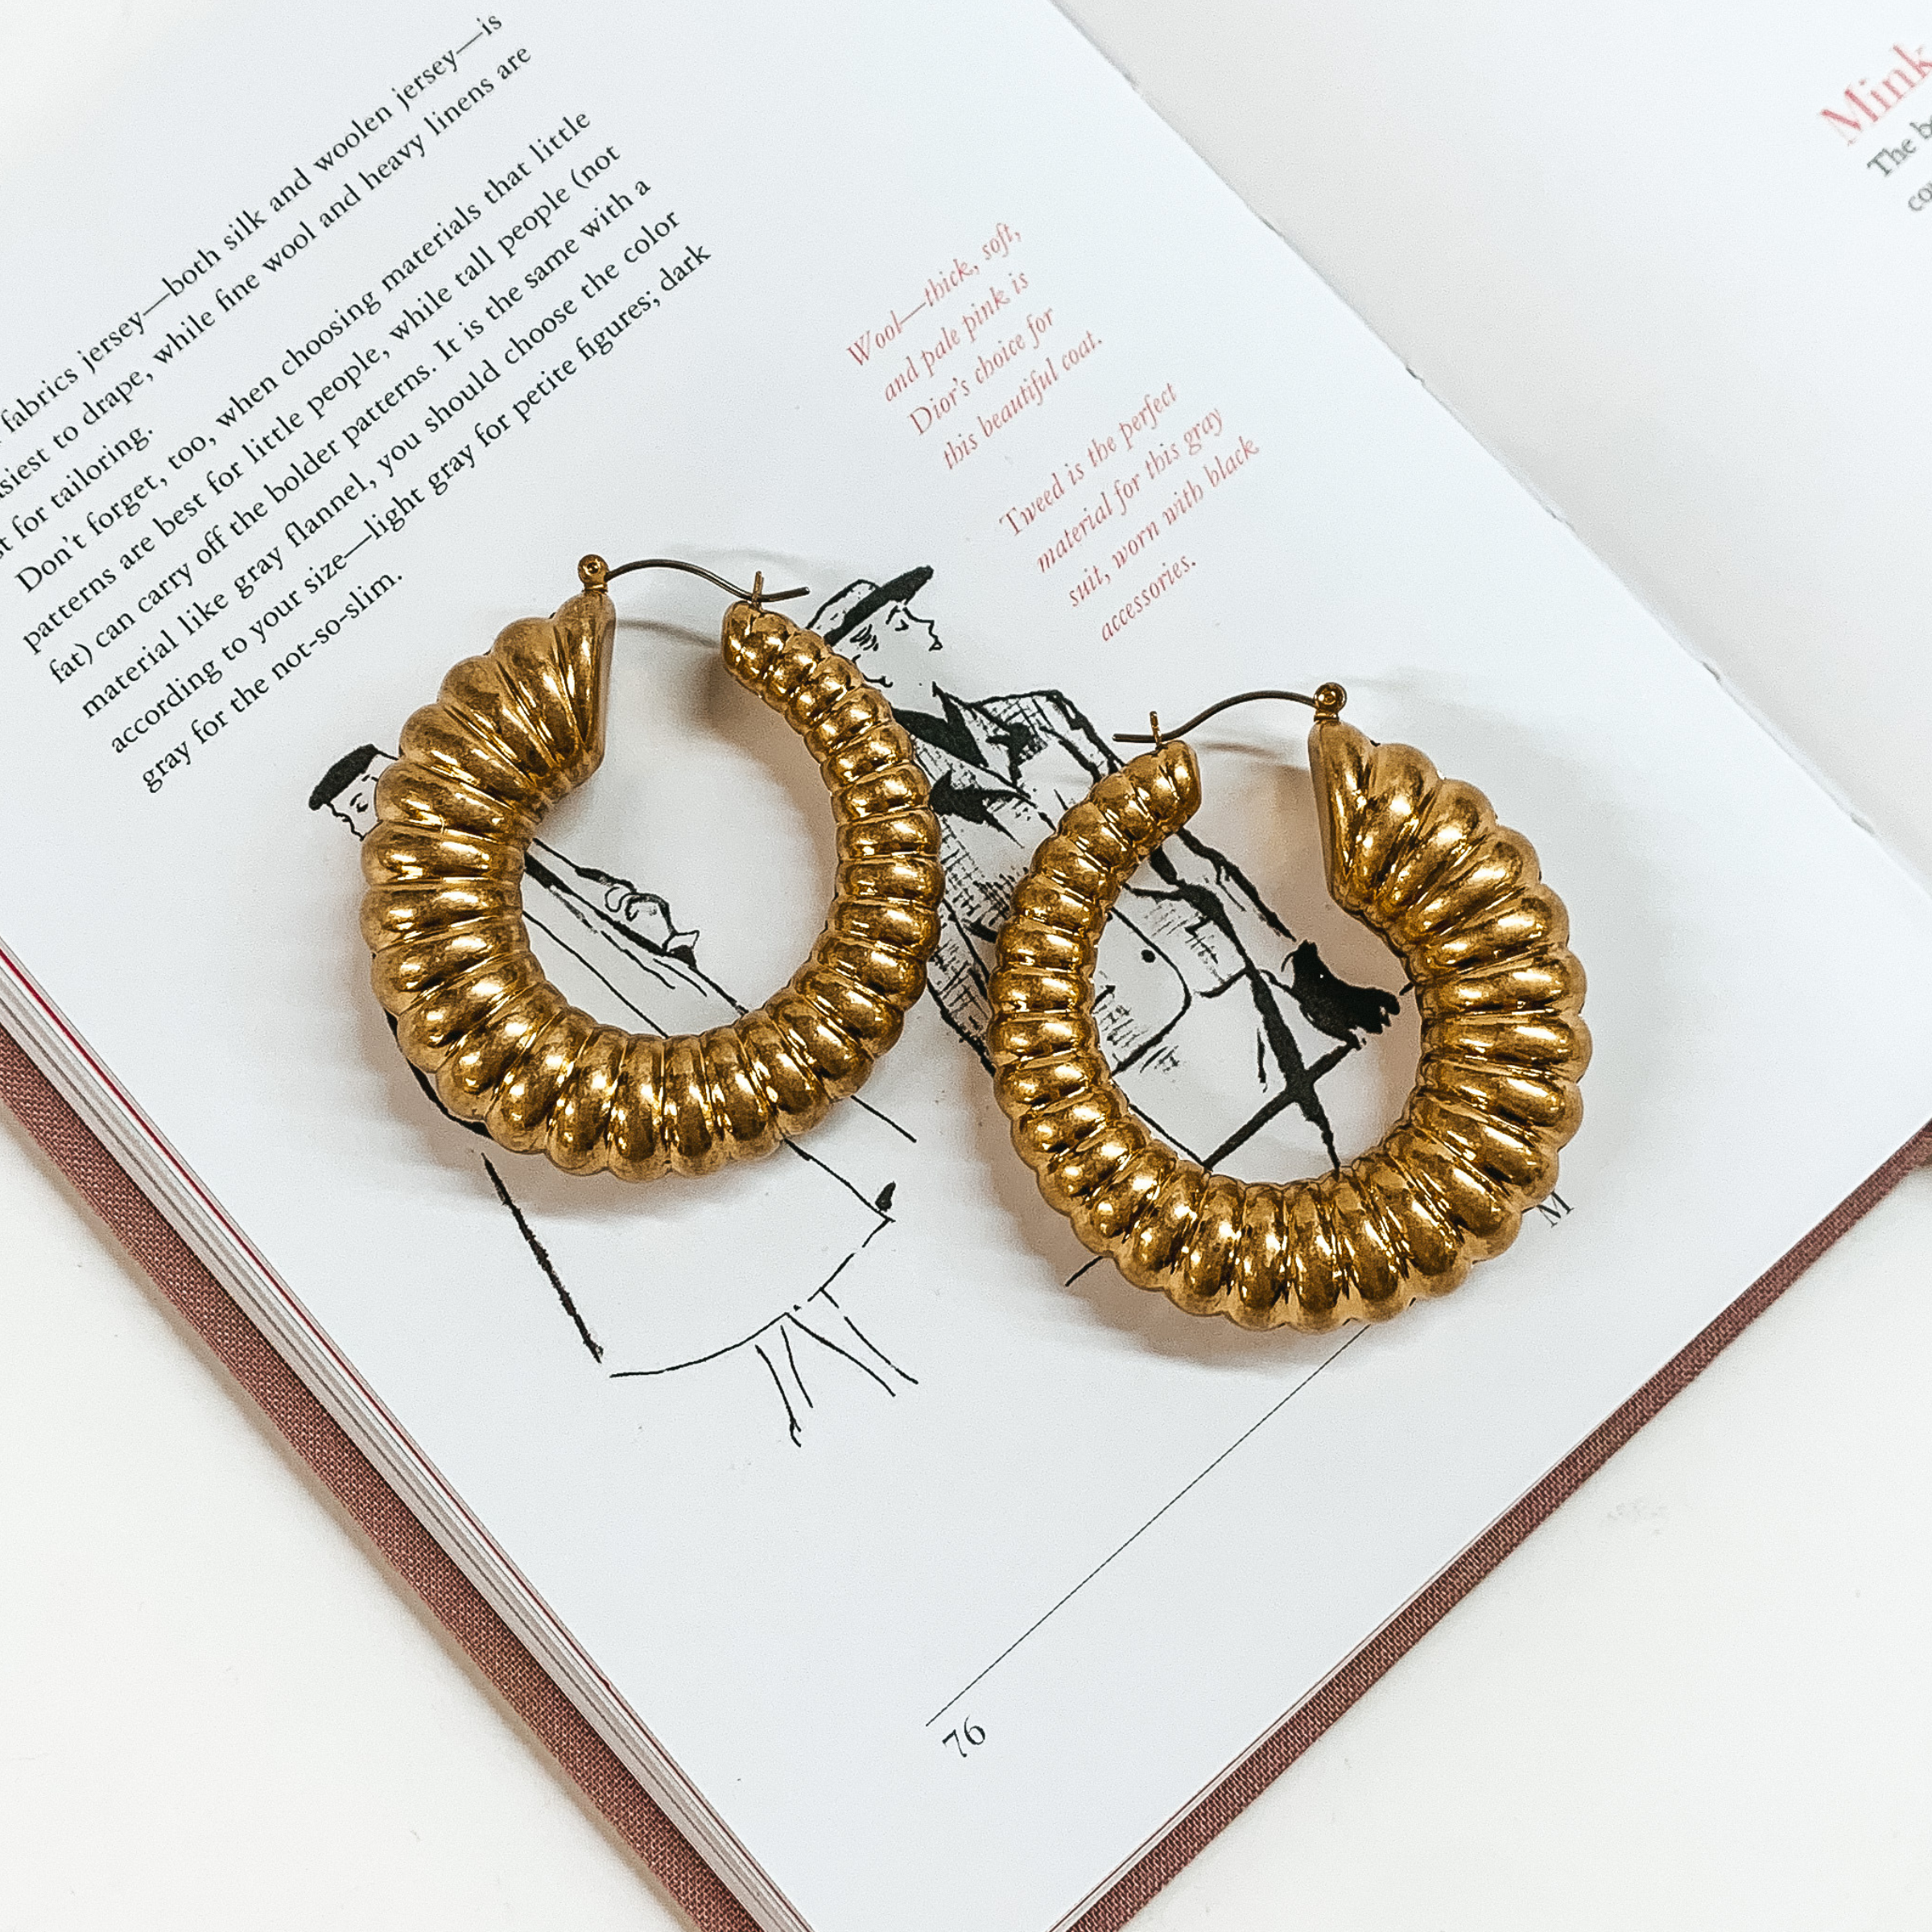 Gold hoop earrings pictured on top of an open book on a white background. 